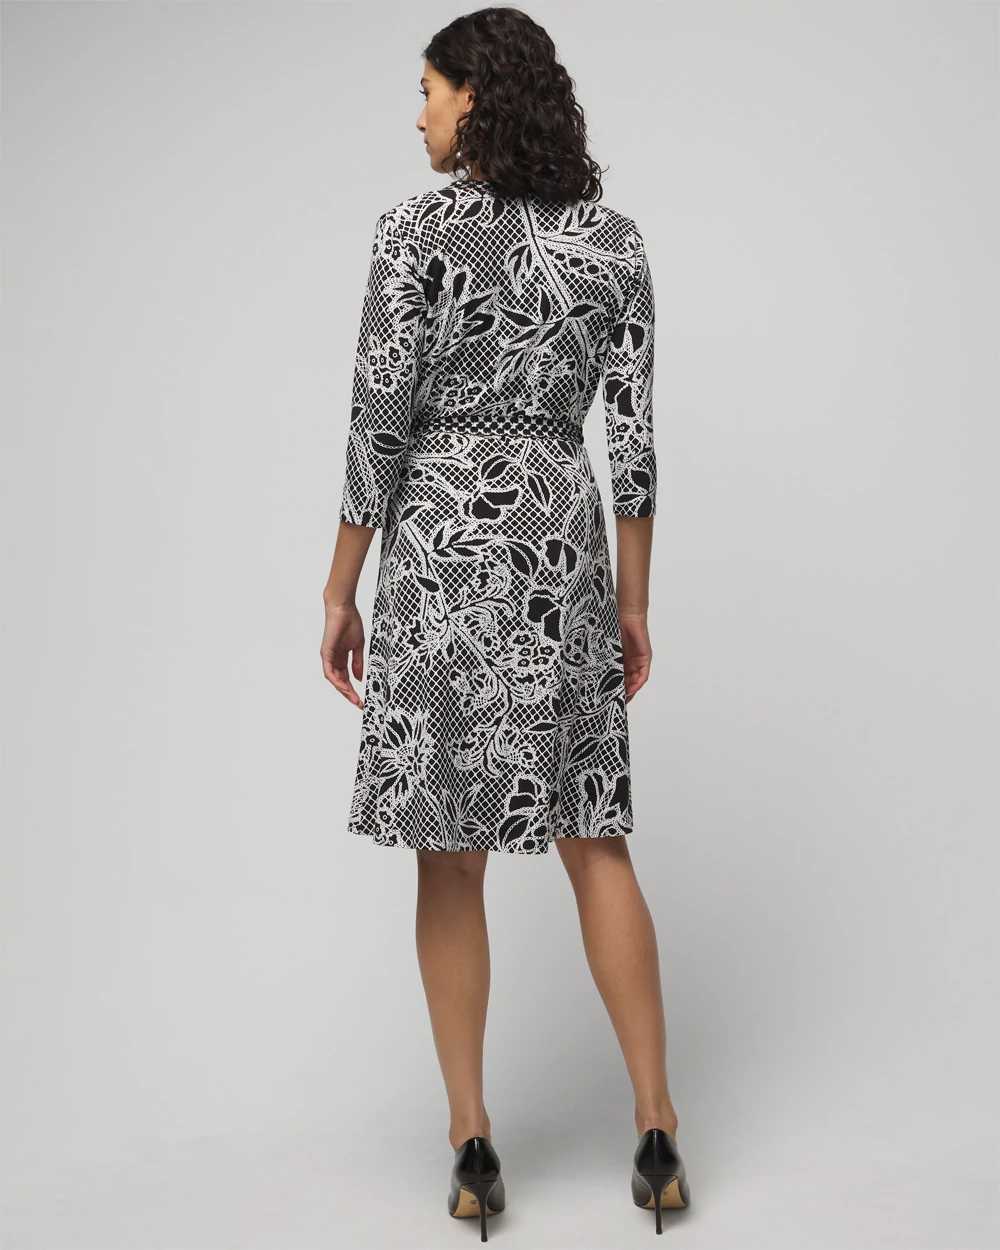 3/4 Sleeve Reversible Wrap Dress click to view larger image.